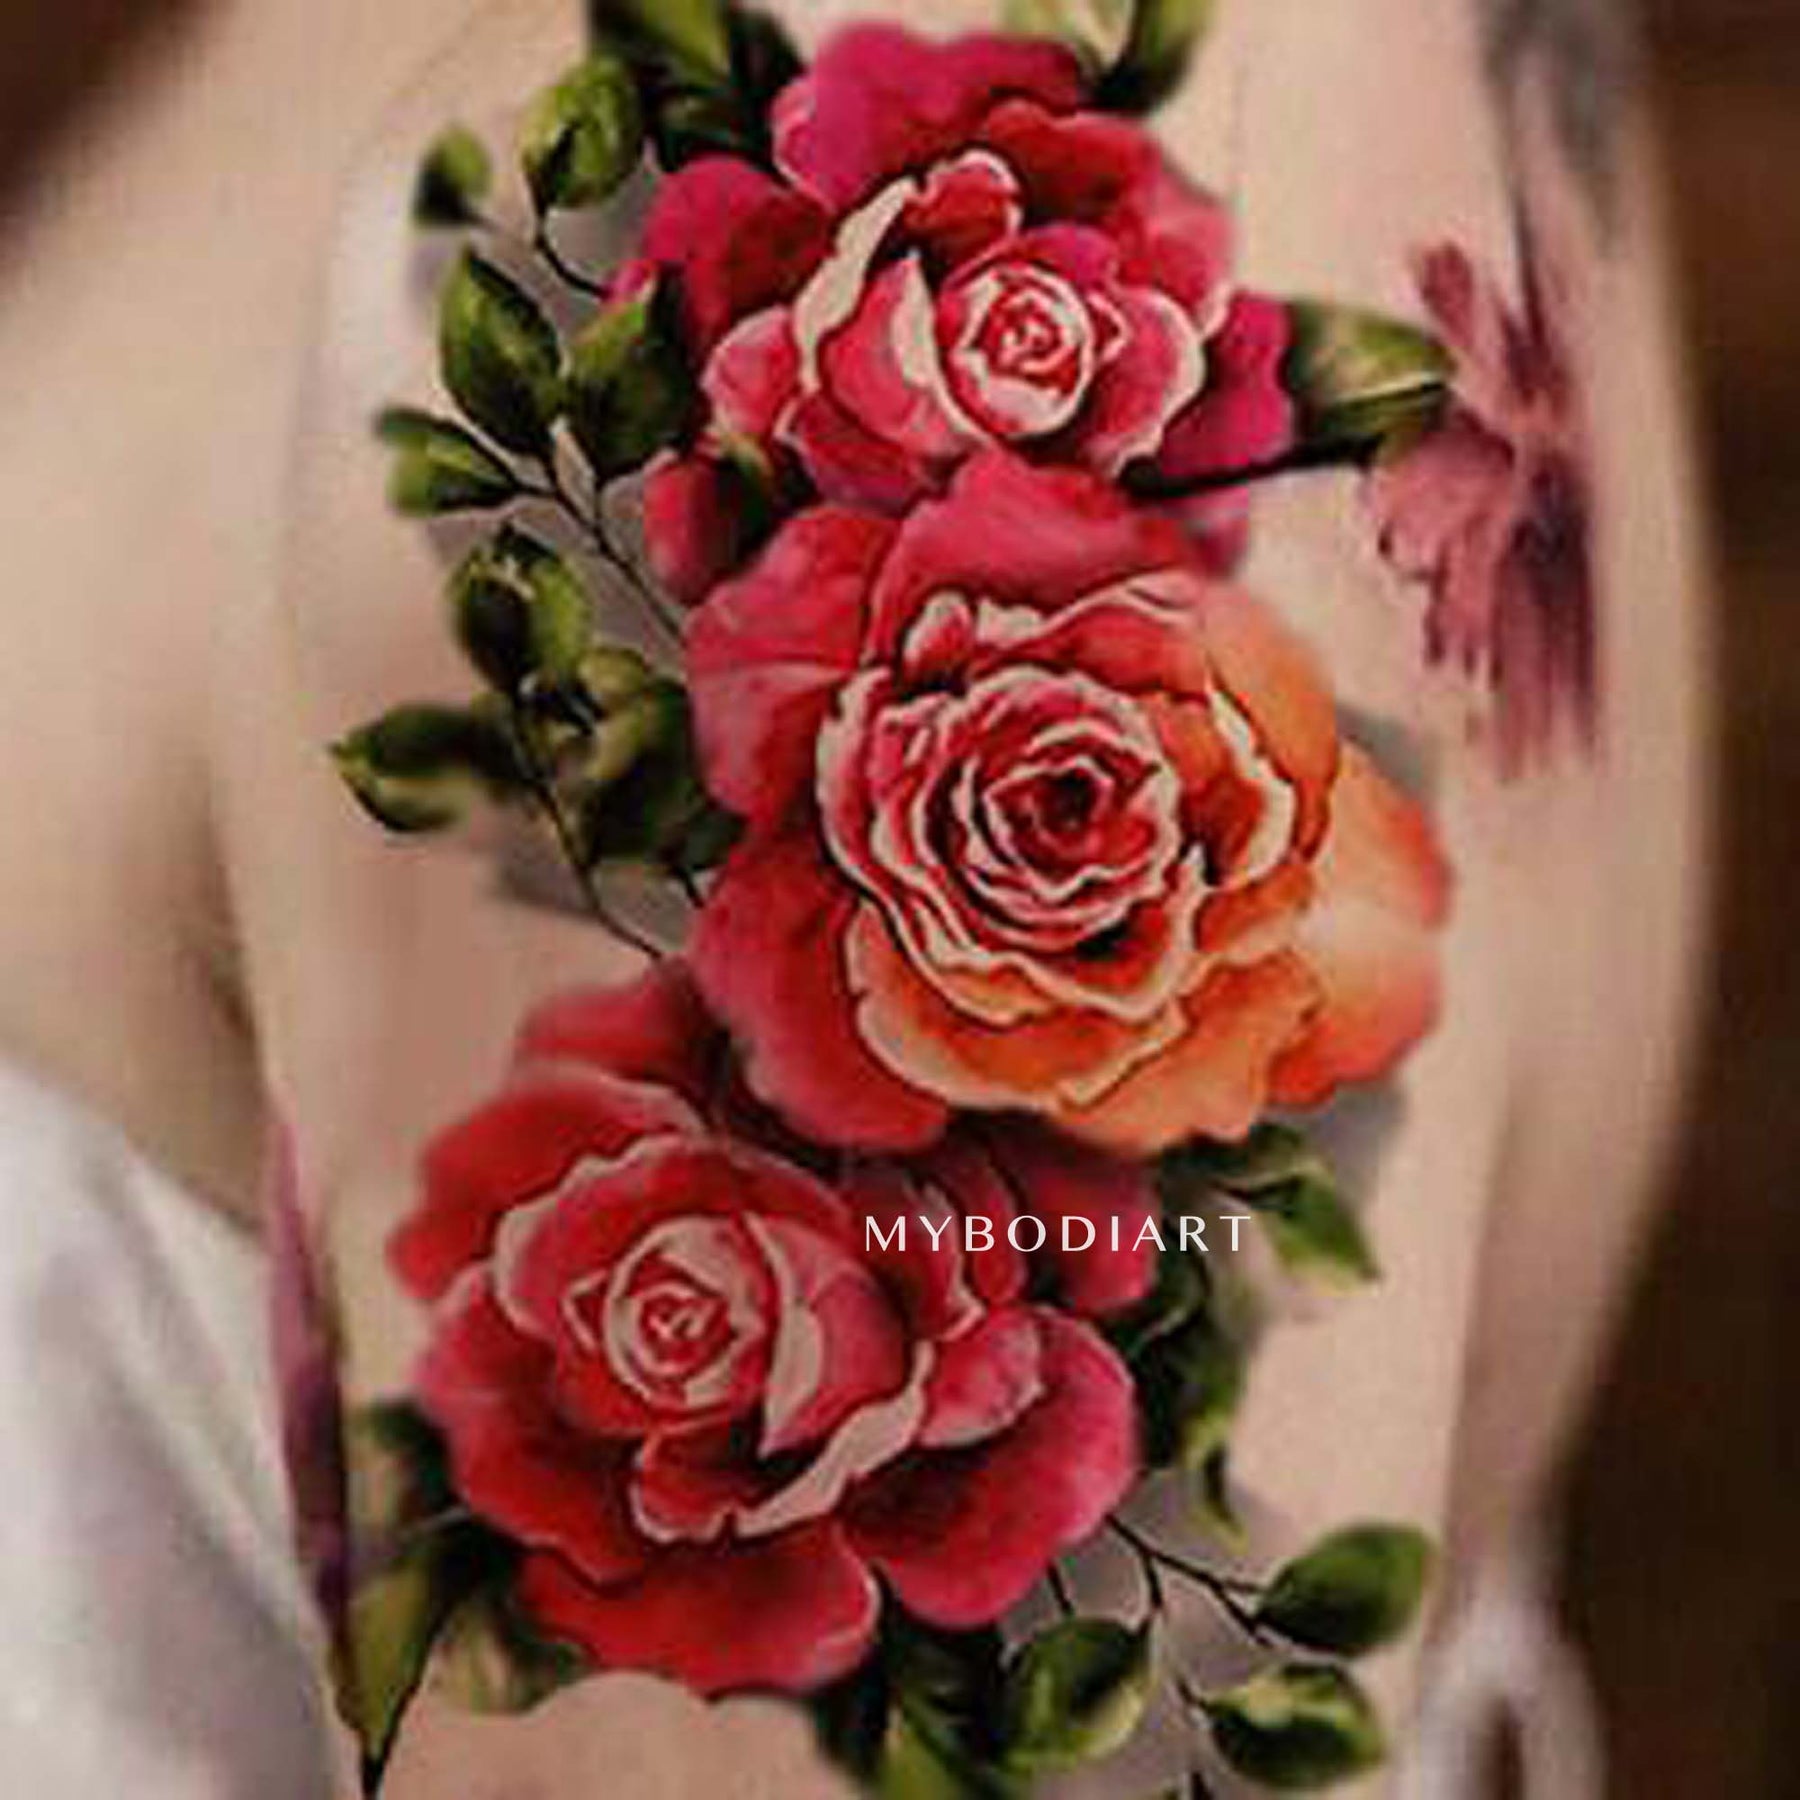 Vintage Floral Detailed Hand Drawn Rose With Leaves Set Victorian Concept Tattoo  Flower Design Element Collection Bouquet Art Isolated On White Background  Vector Stock Illustration - Download Image Now - iStock